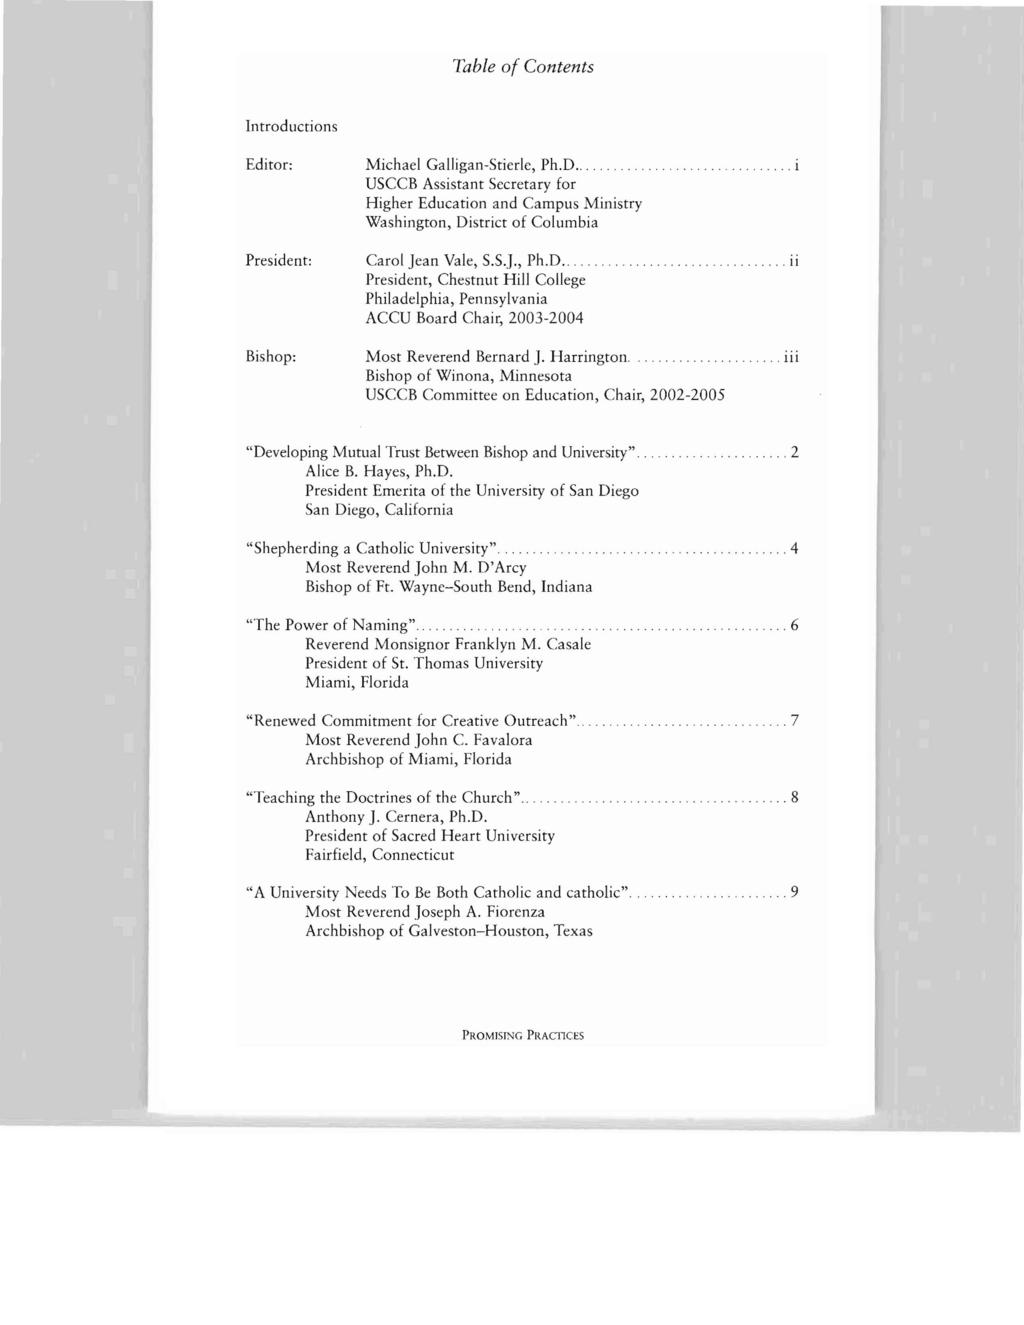 Table of Contents Introductions Editor: Michael Galligan-Stierle, Ph.D.. USCCB Assistant Secretary for Higher Education and Campus Ministry Washington, District of Columbia.